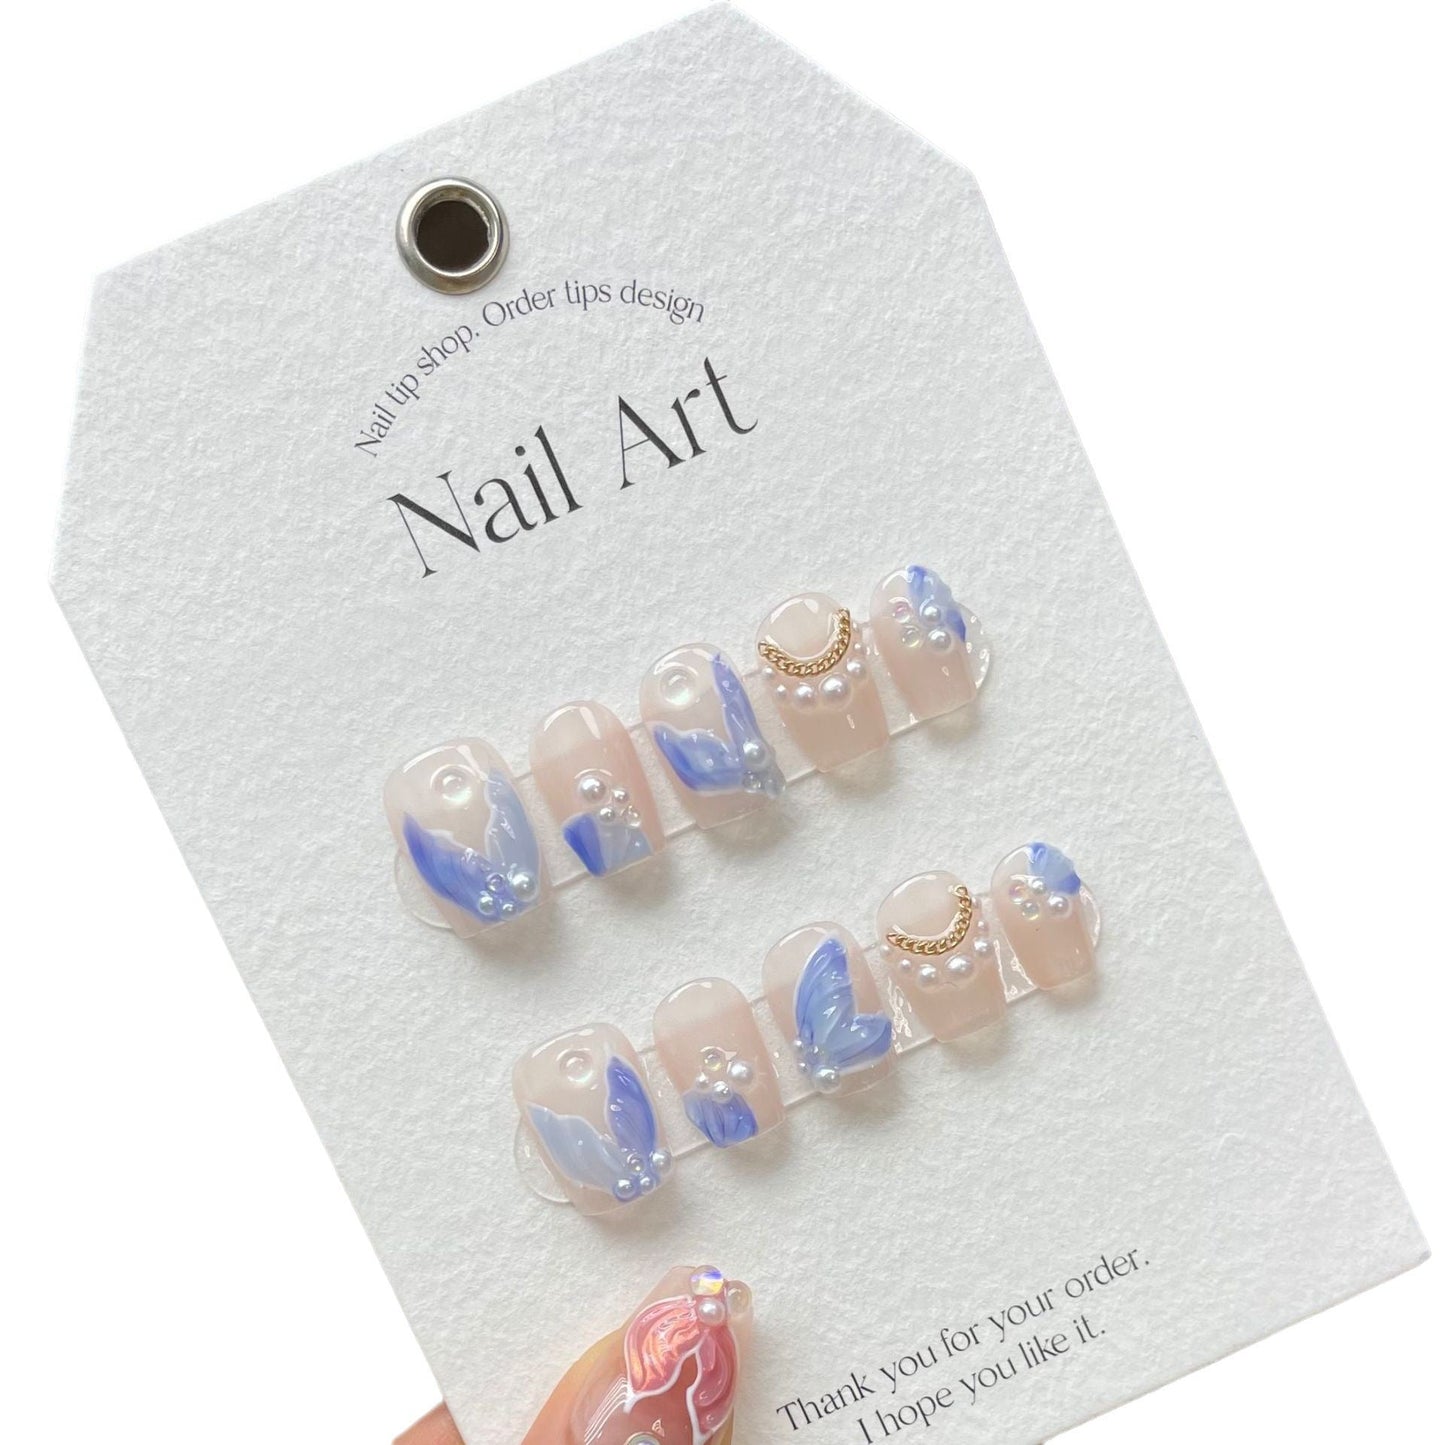 888 Blue fish tail style press on nails 100% handmade false nails nude color blue